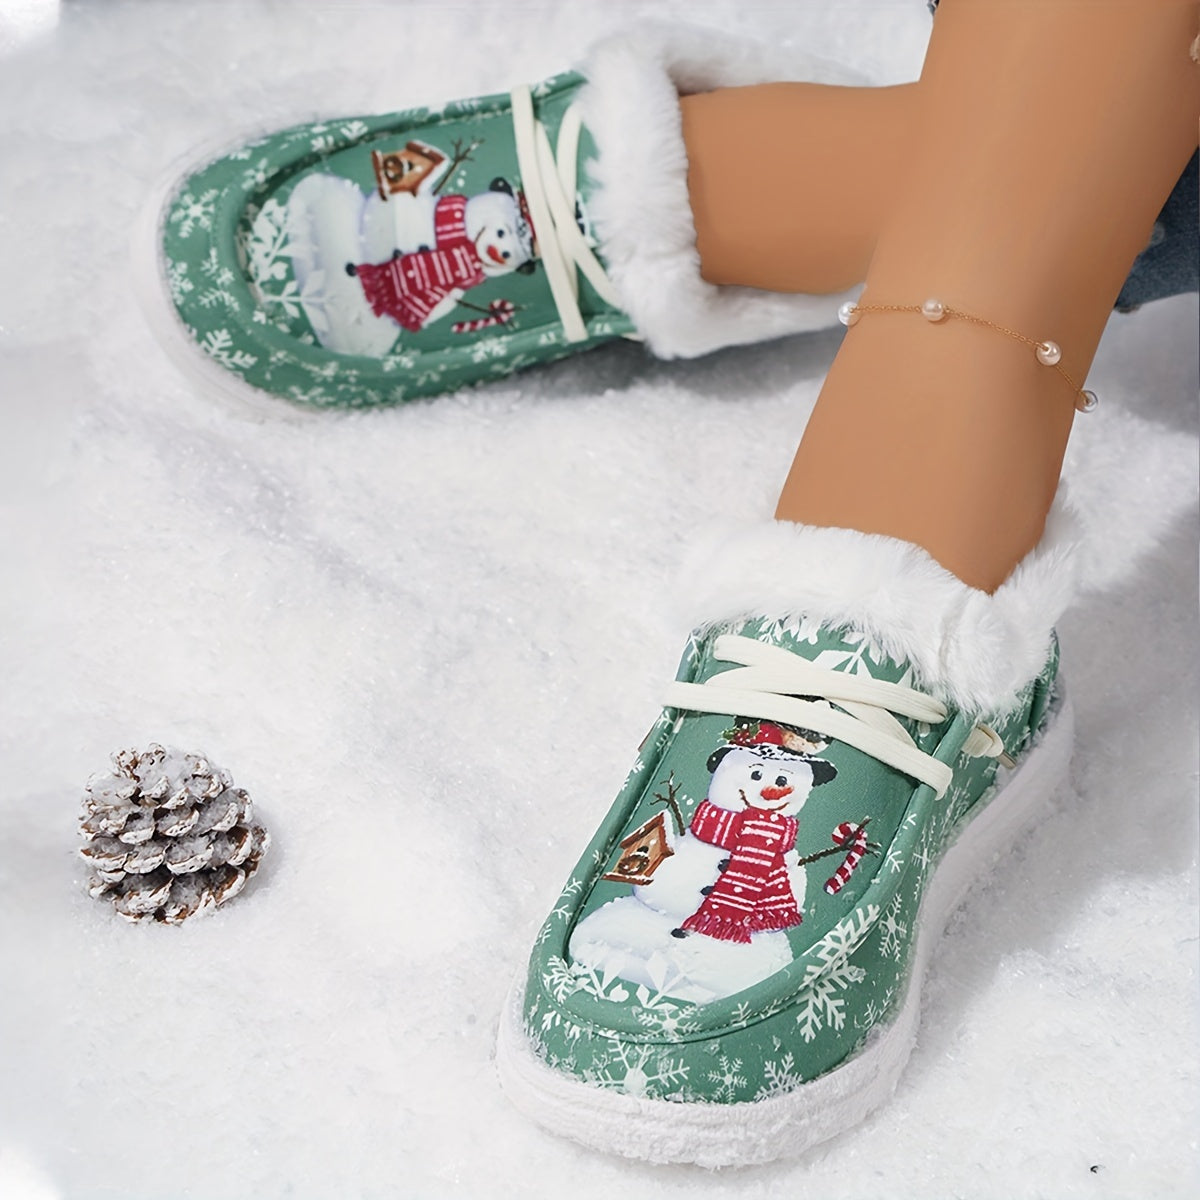 Women's Cartoon Snowflake & Snowman Pattern Shoes, Soft Sole Flat Thermal Lined Shoes, Christmas Non-slip Fluffy Canvas Shoes